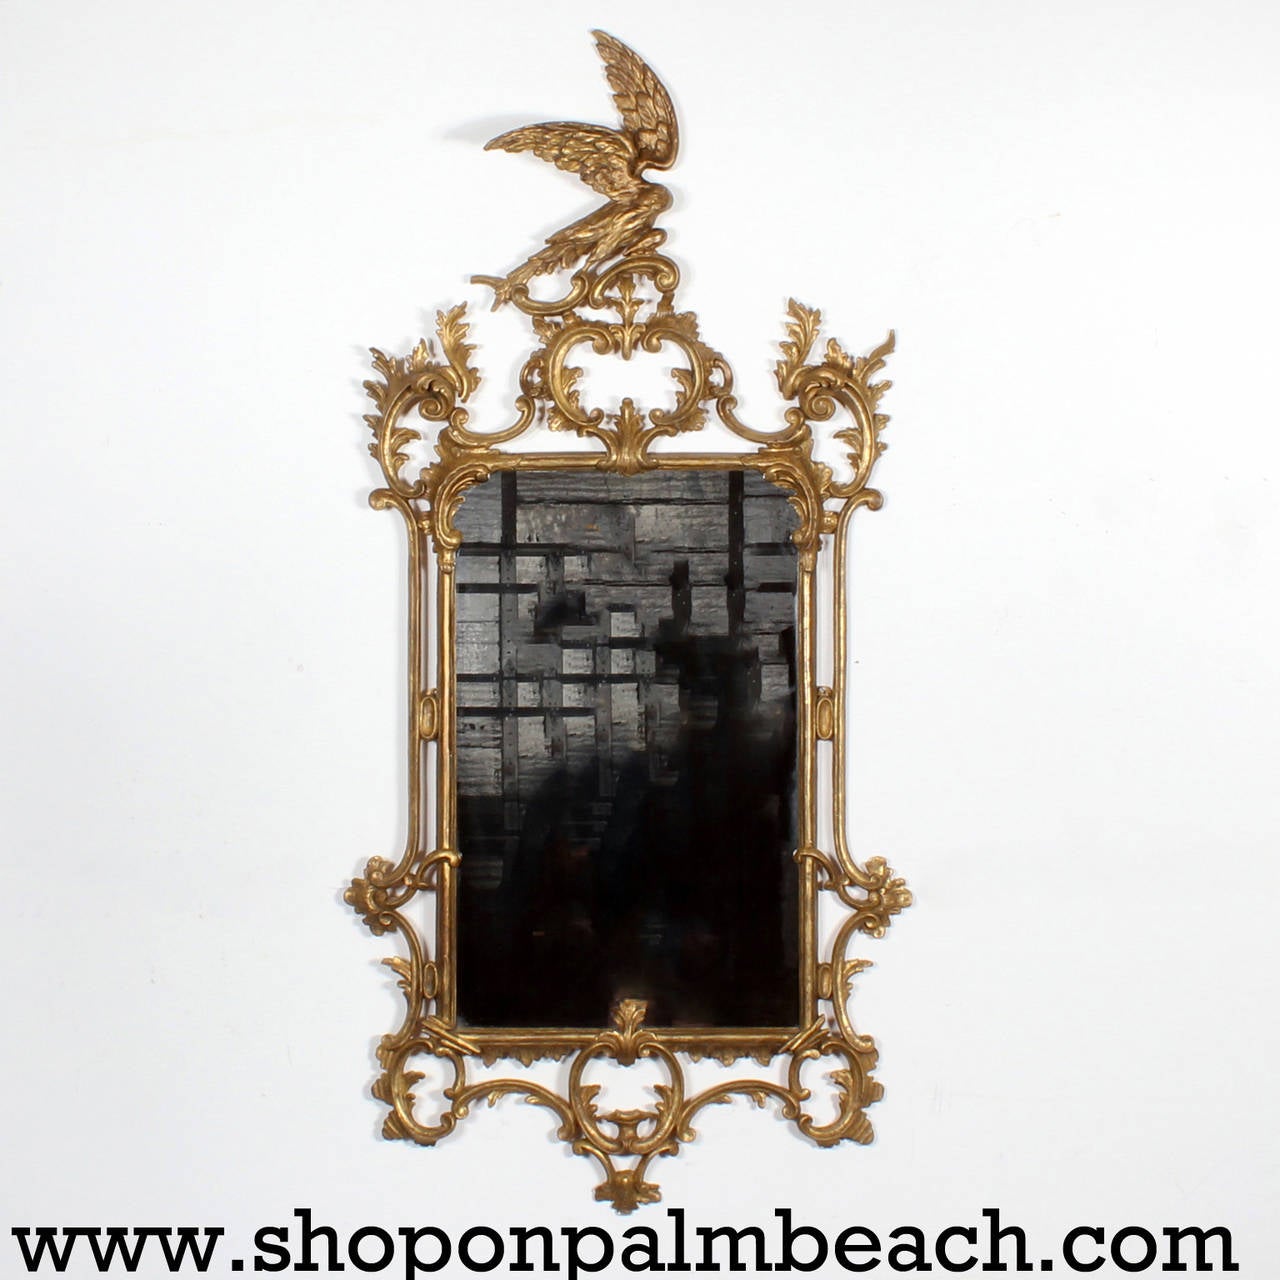 An incredible find, a true mirrored pair of carved and gilt late 18th-early 19th century. Georgian mirrors each with opposing Ho Ho birds and extensive scrolling motifs, in the Chinese Chippendale manner. Most notable are the open winged Ho Ho